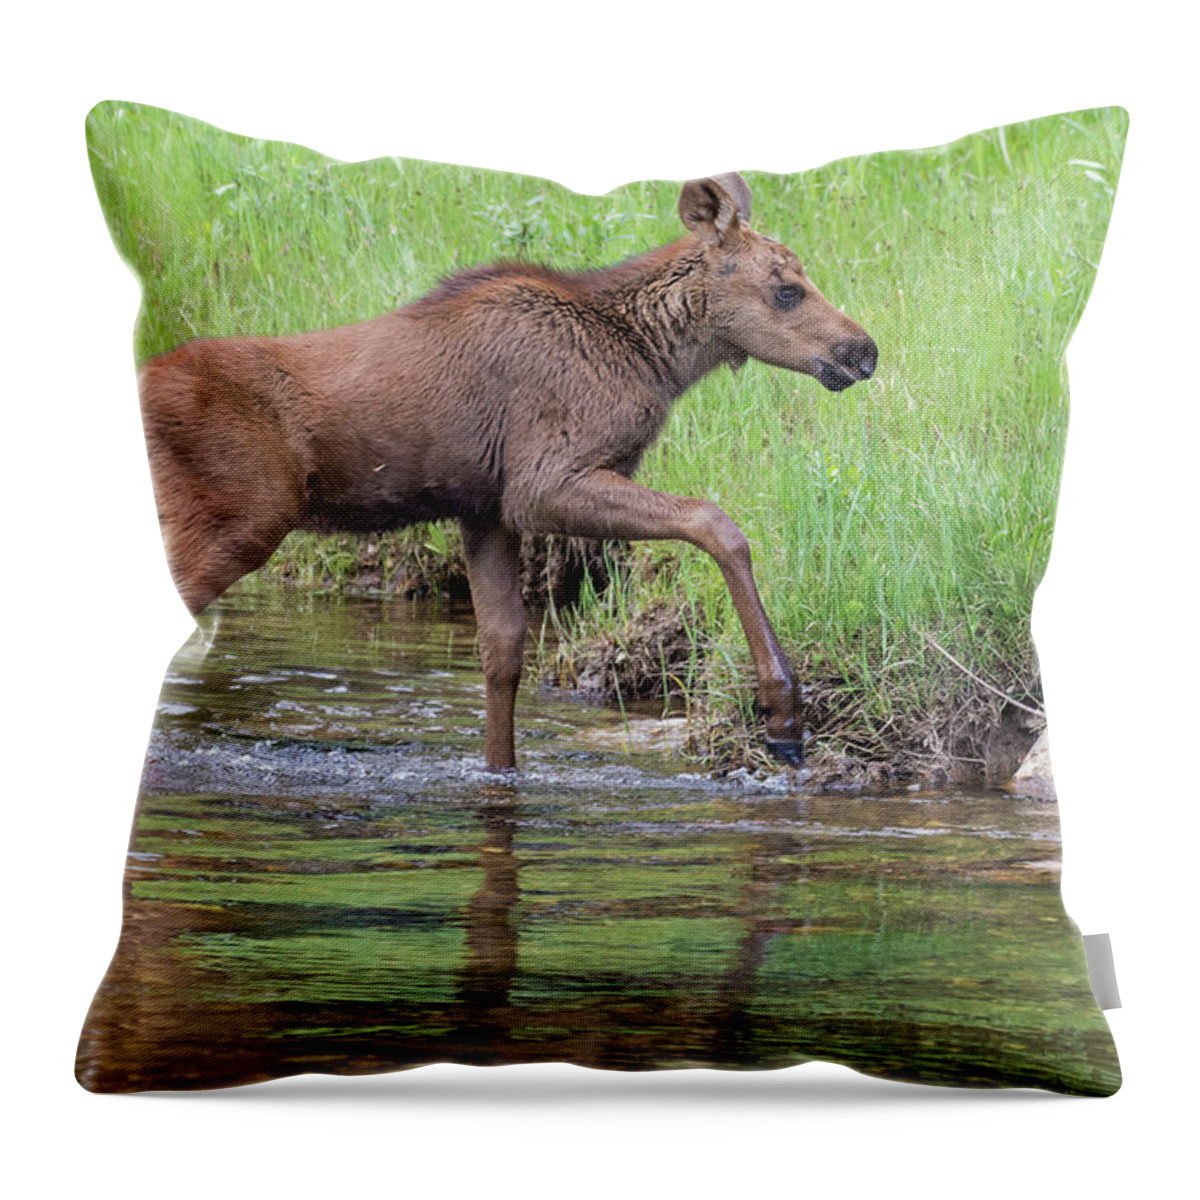 Moose Calf Throw Pillow featuring the photograph Fording the Colorado River by Mindy Musick King